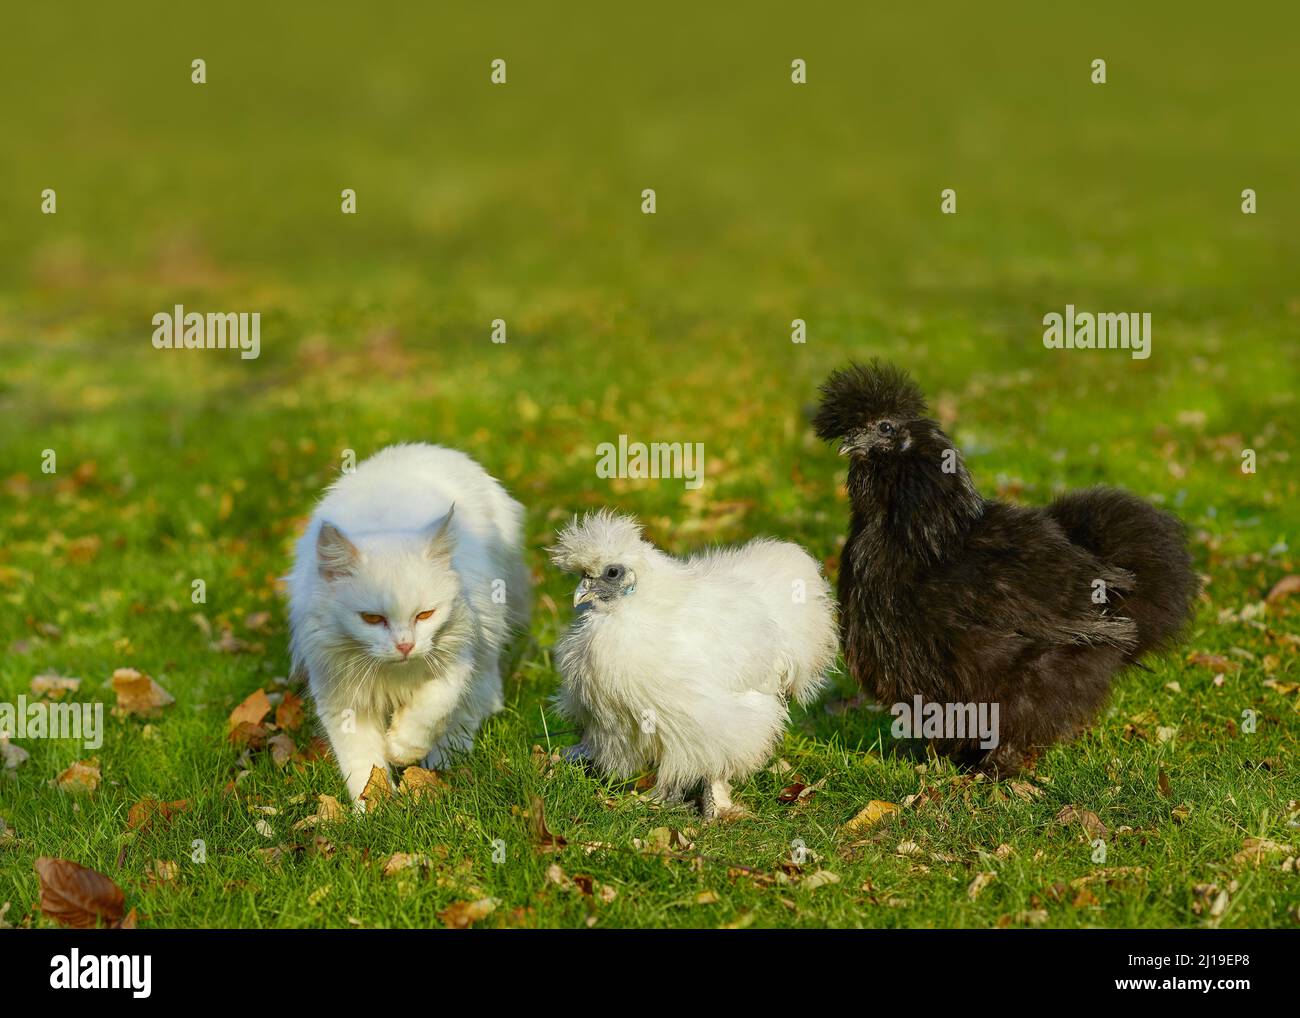 Two fluffy chickens and a white cat are walking together in a meadow Stock Photo